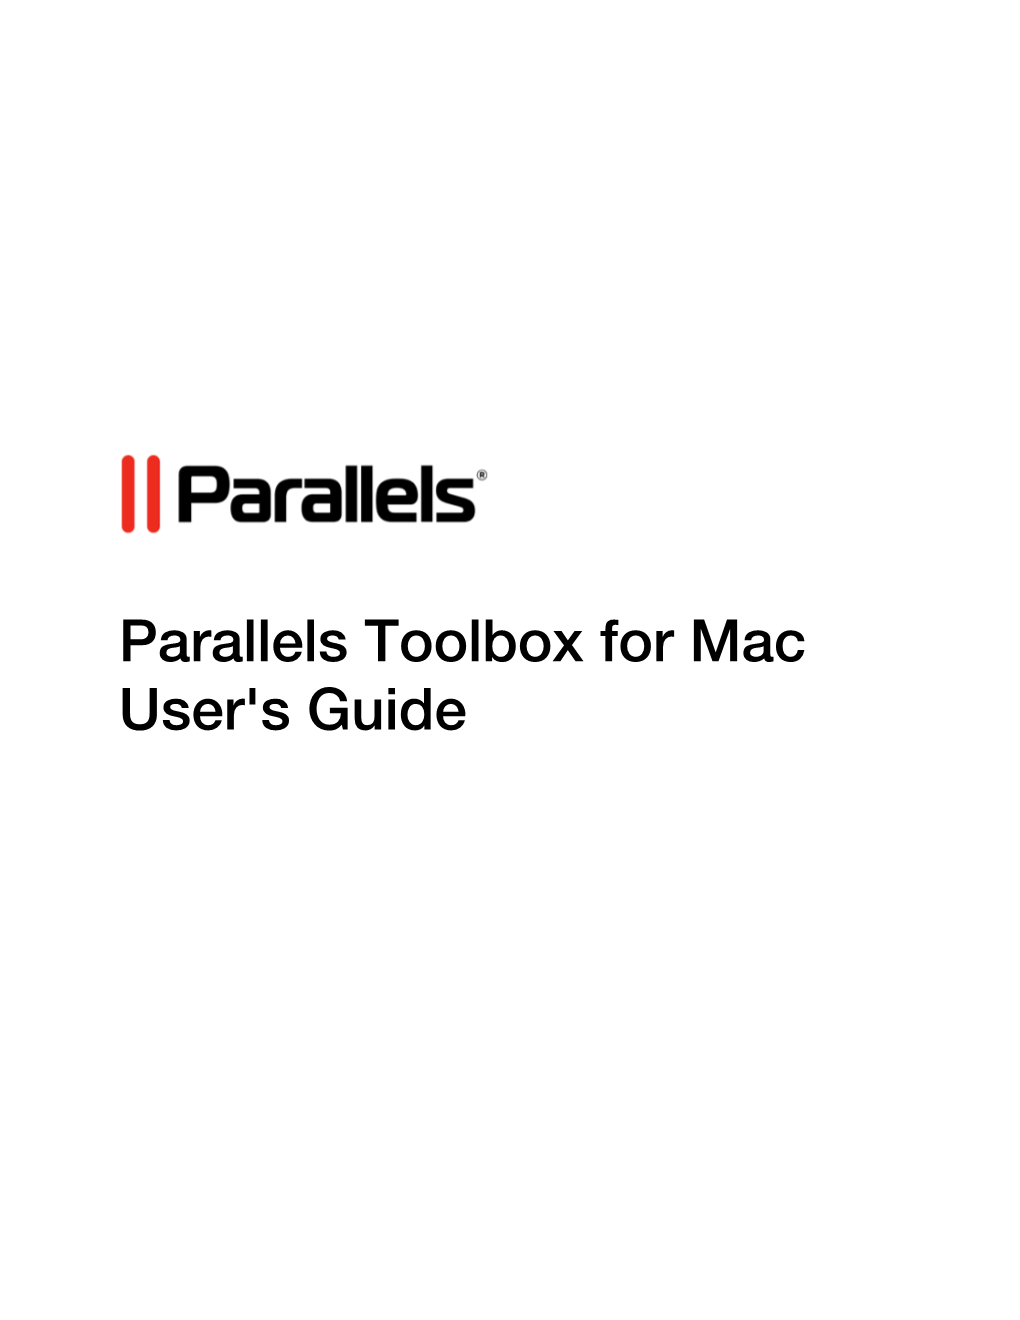 Parallels Toolbox for Mac User's Guide